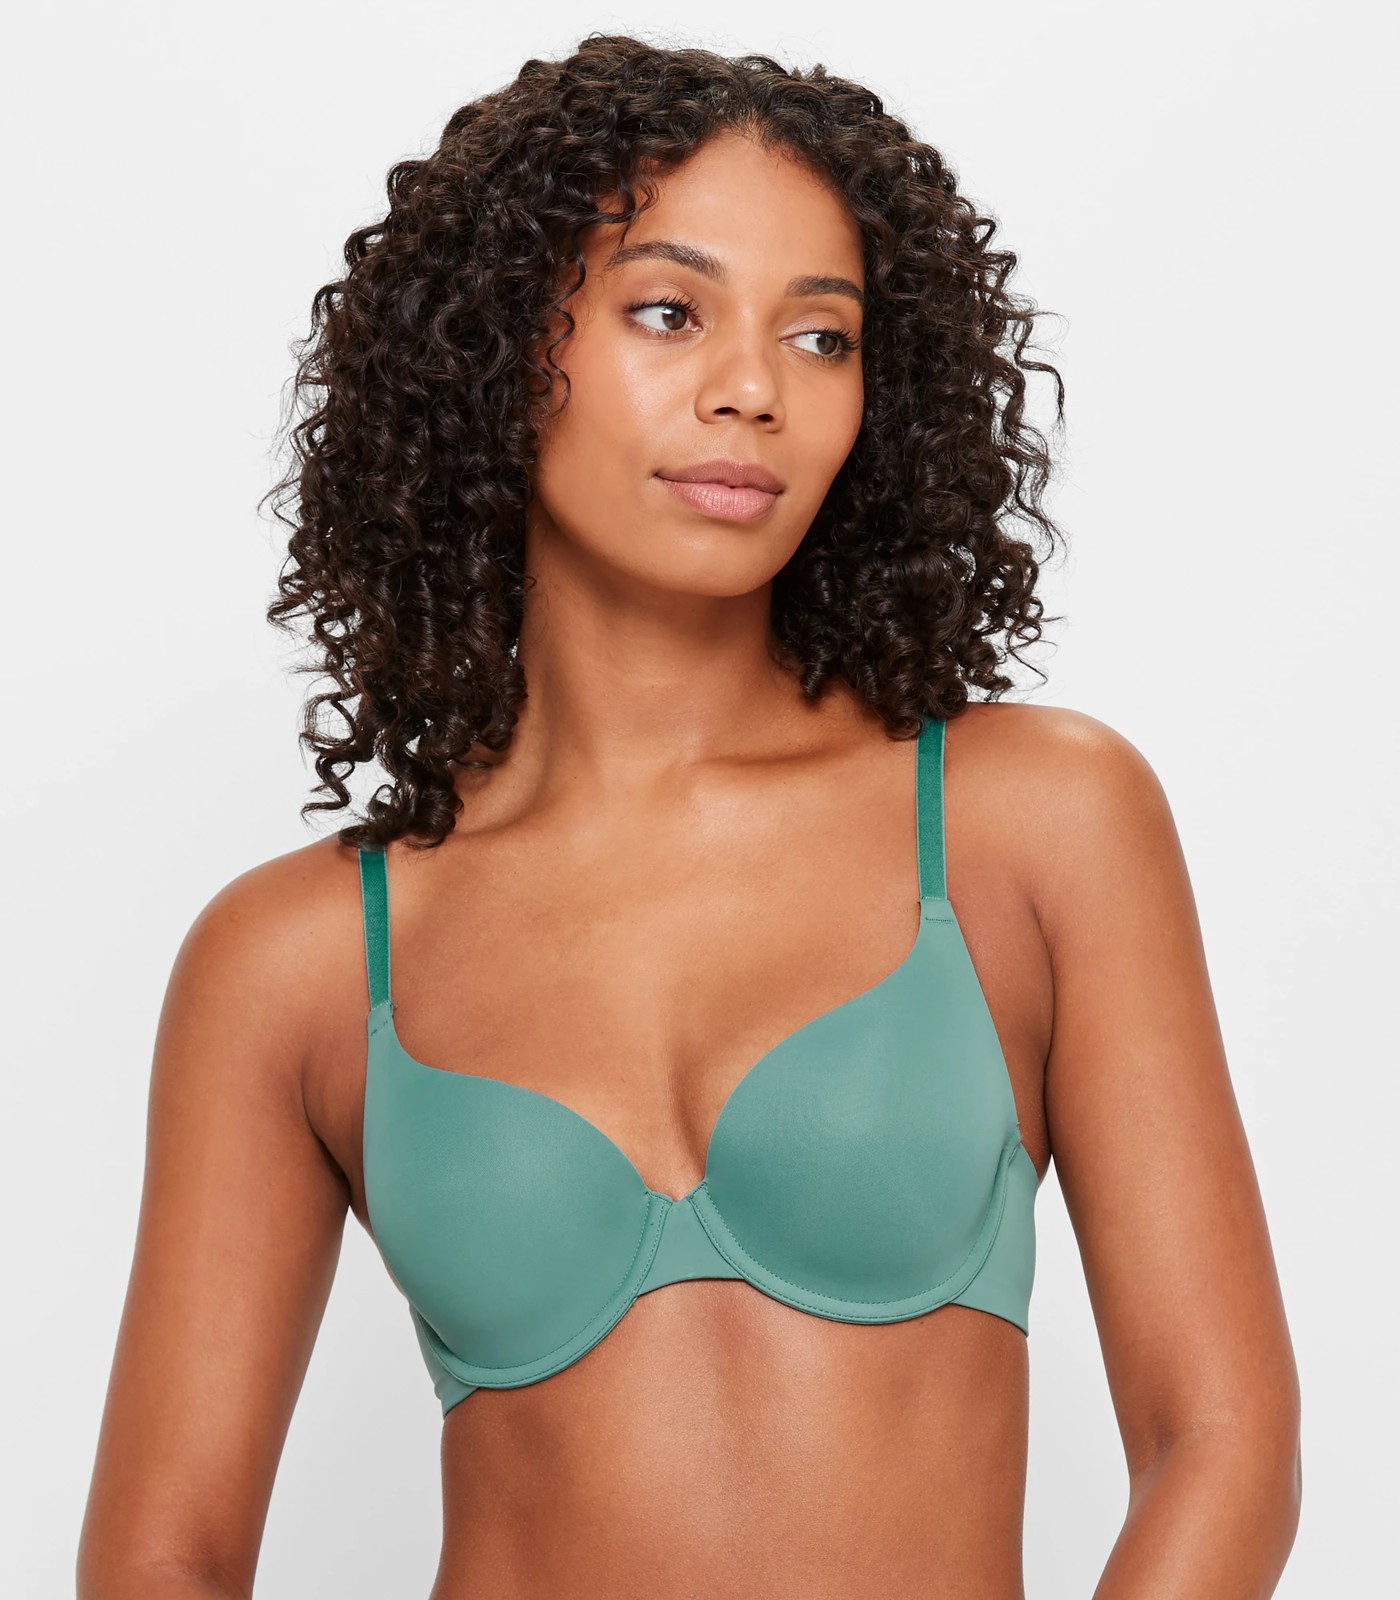 Every day we create amazing transformations like this, one bra